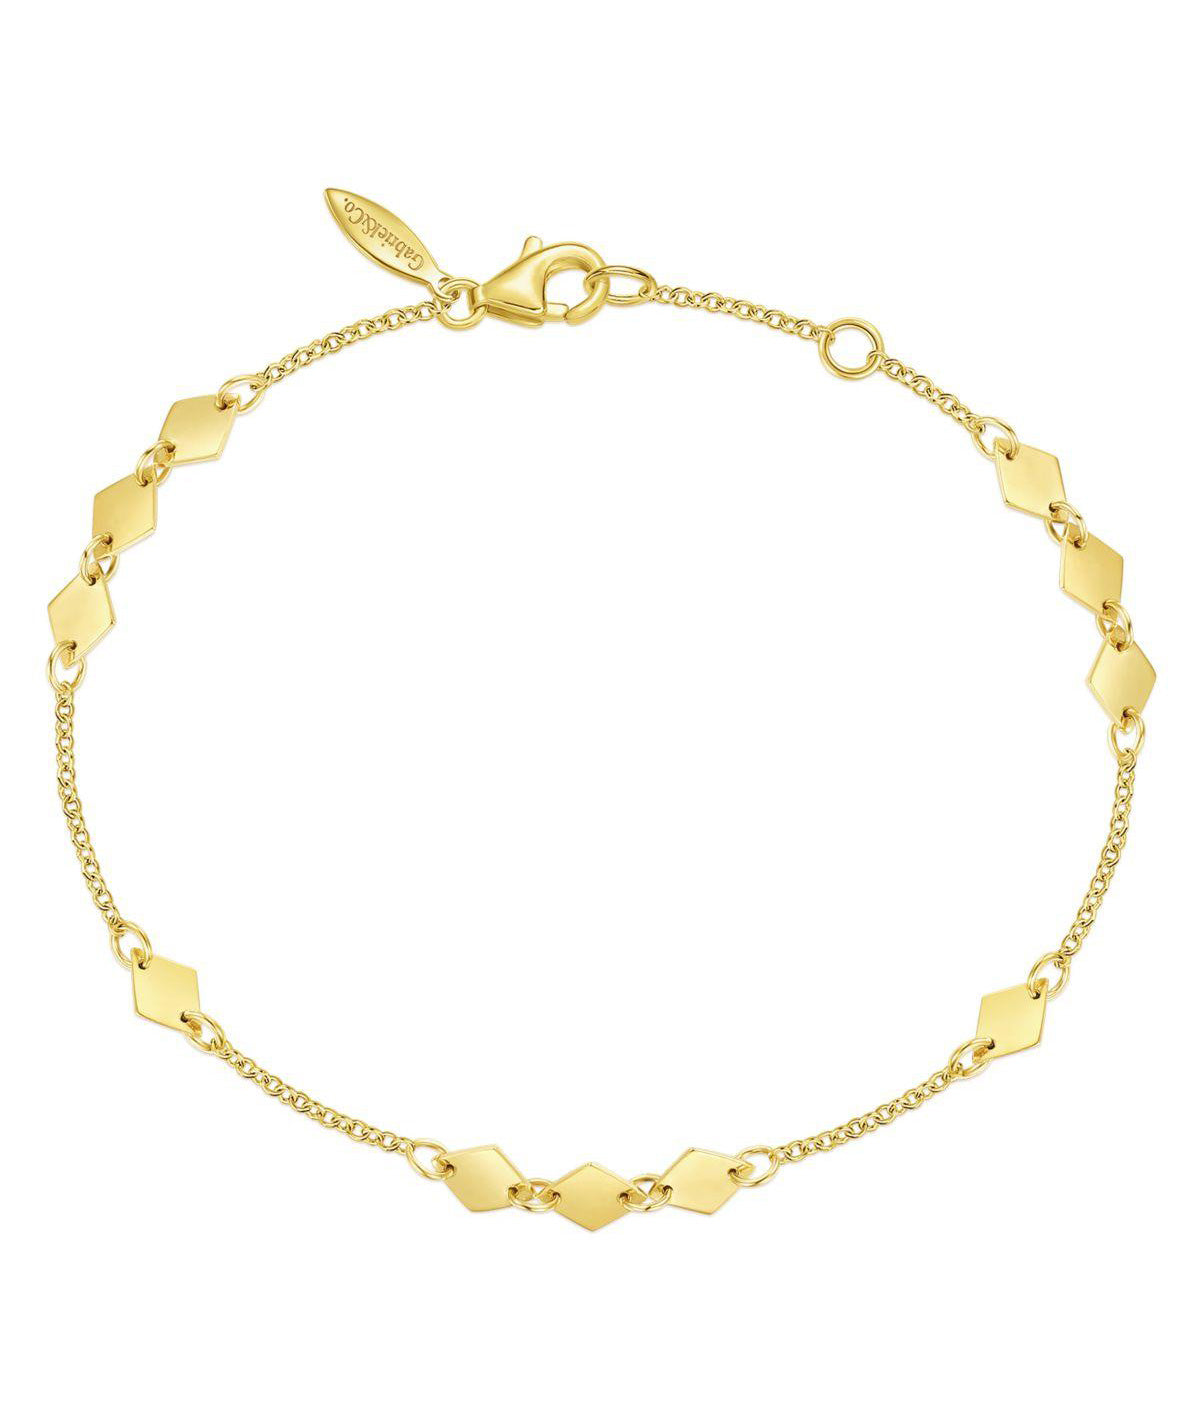 14K Yellow Gold Chain Bracelet with Flat Rhombus Stations